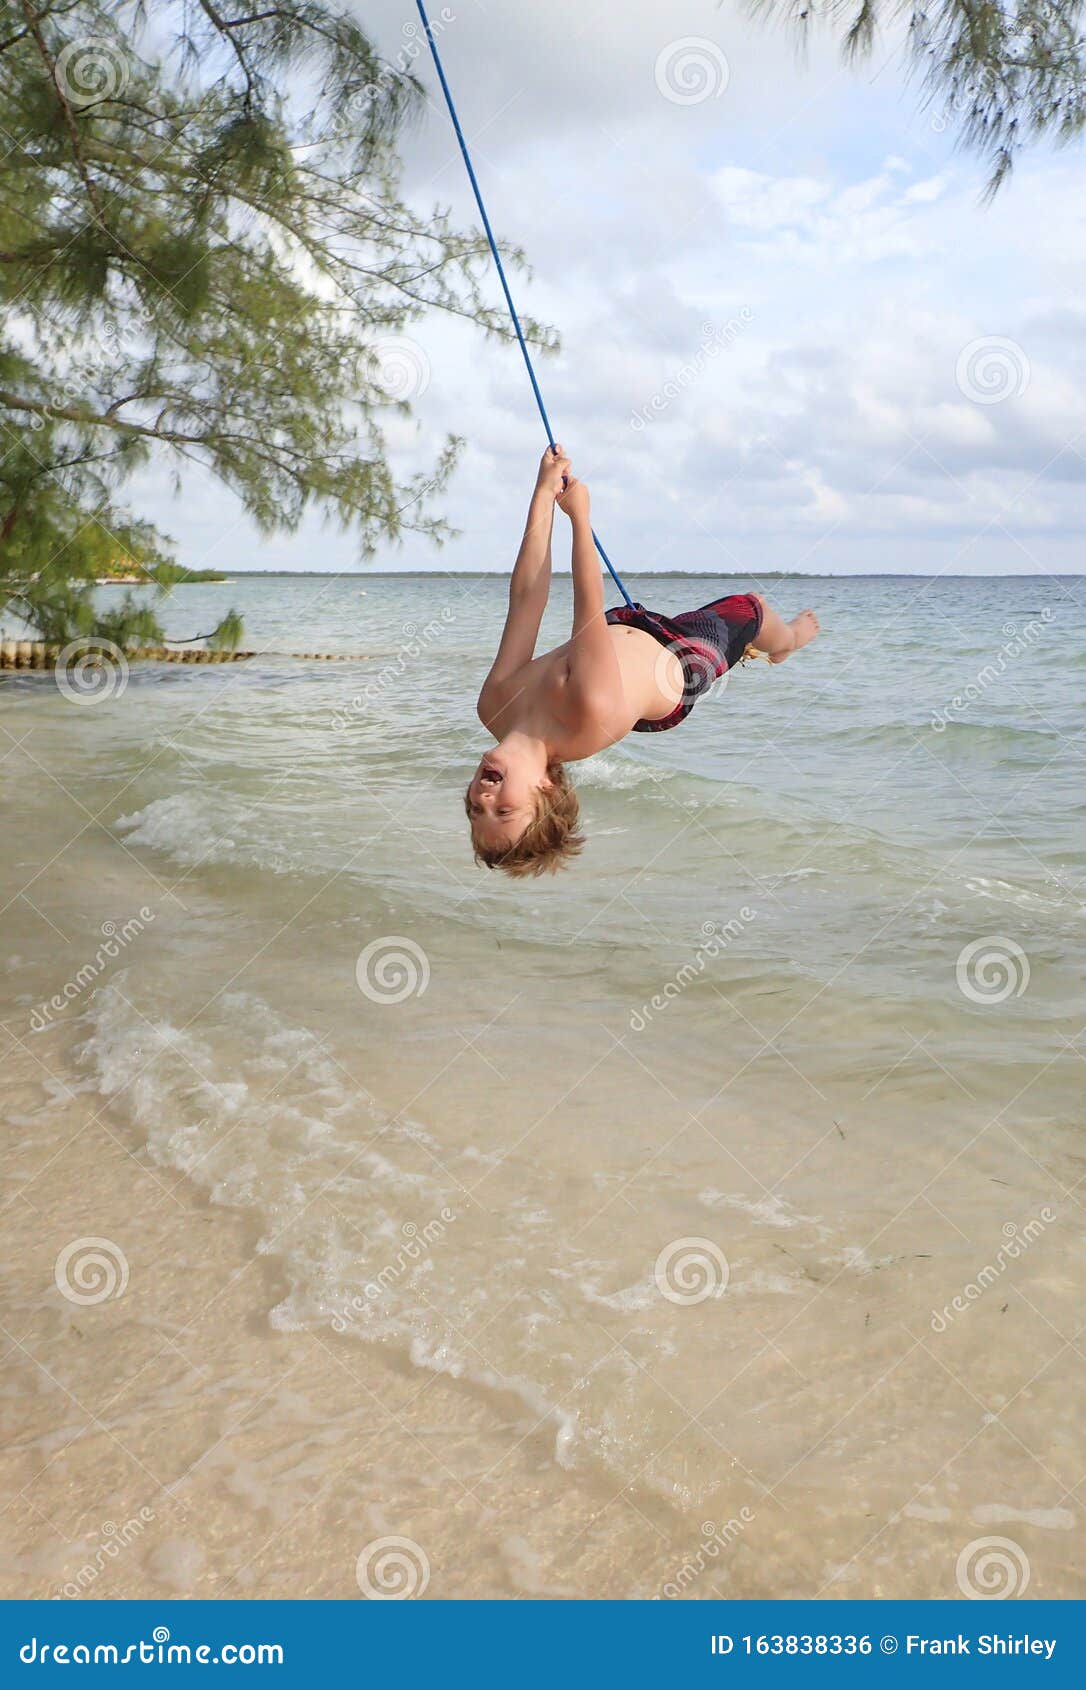 https://thumbs.dreamstime.com/z/young-boy-rope-swing-over-ocean-water-young-boy-having-fun-rope-swing-over-ocean-water-163838336.jpg